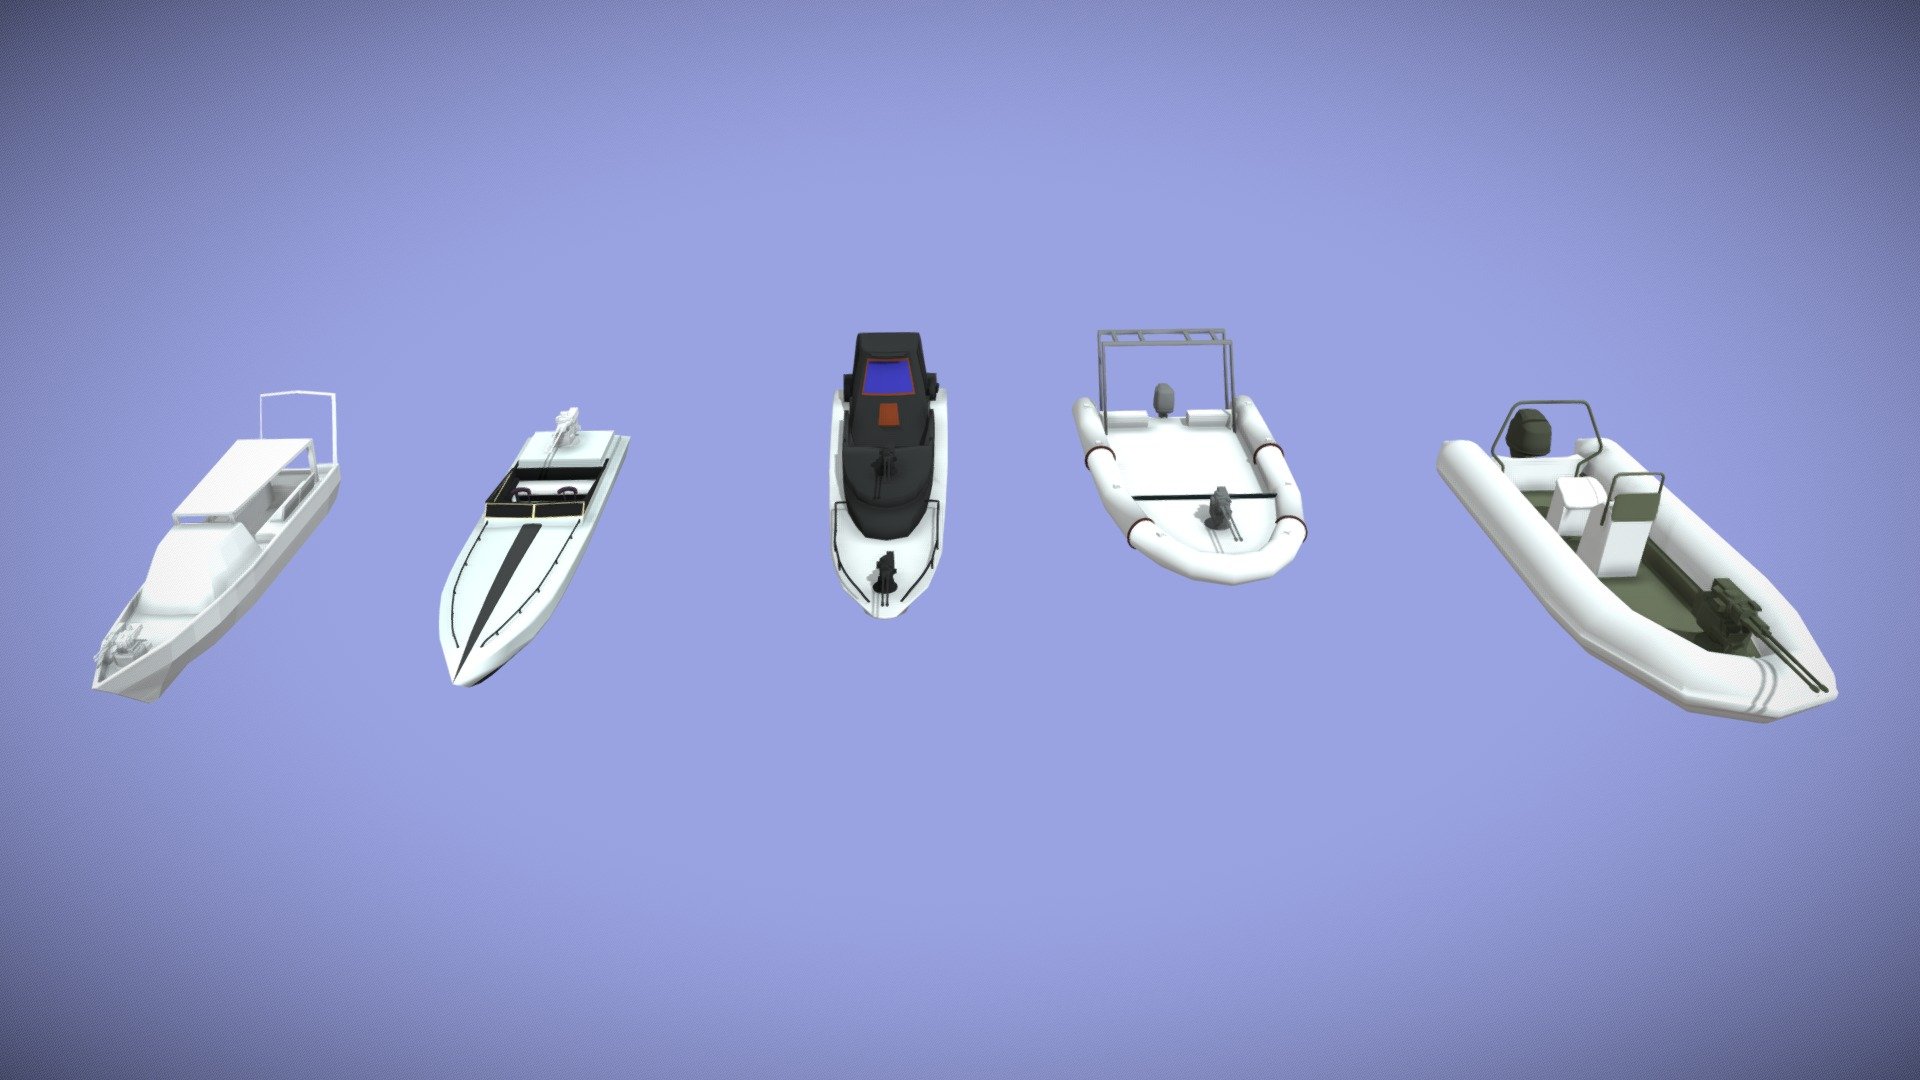 This pack have ships model for game asset, stylized low poly military ships. All models are low poly including .FBX file 3d model